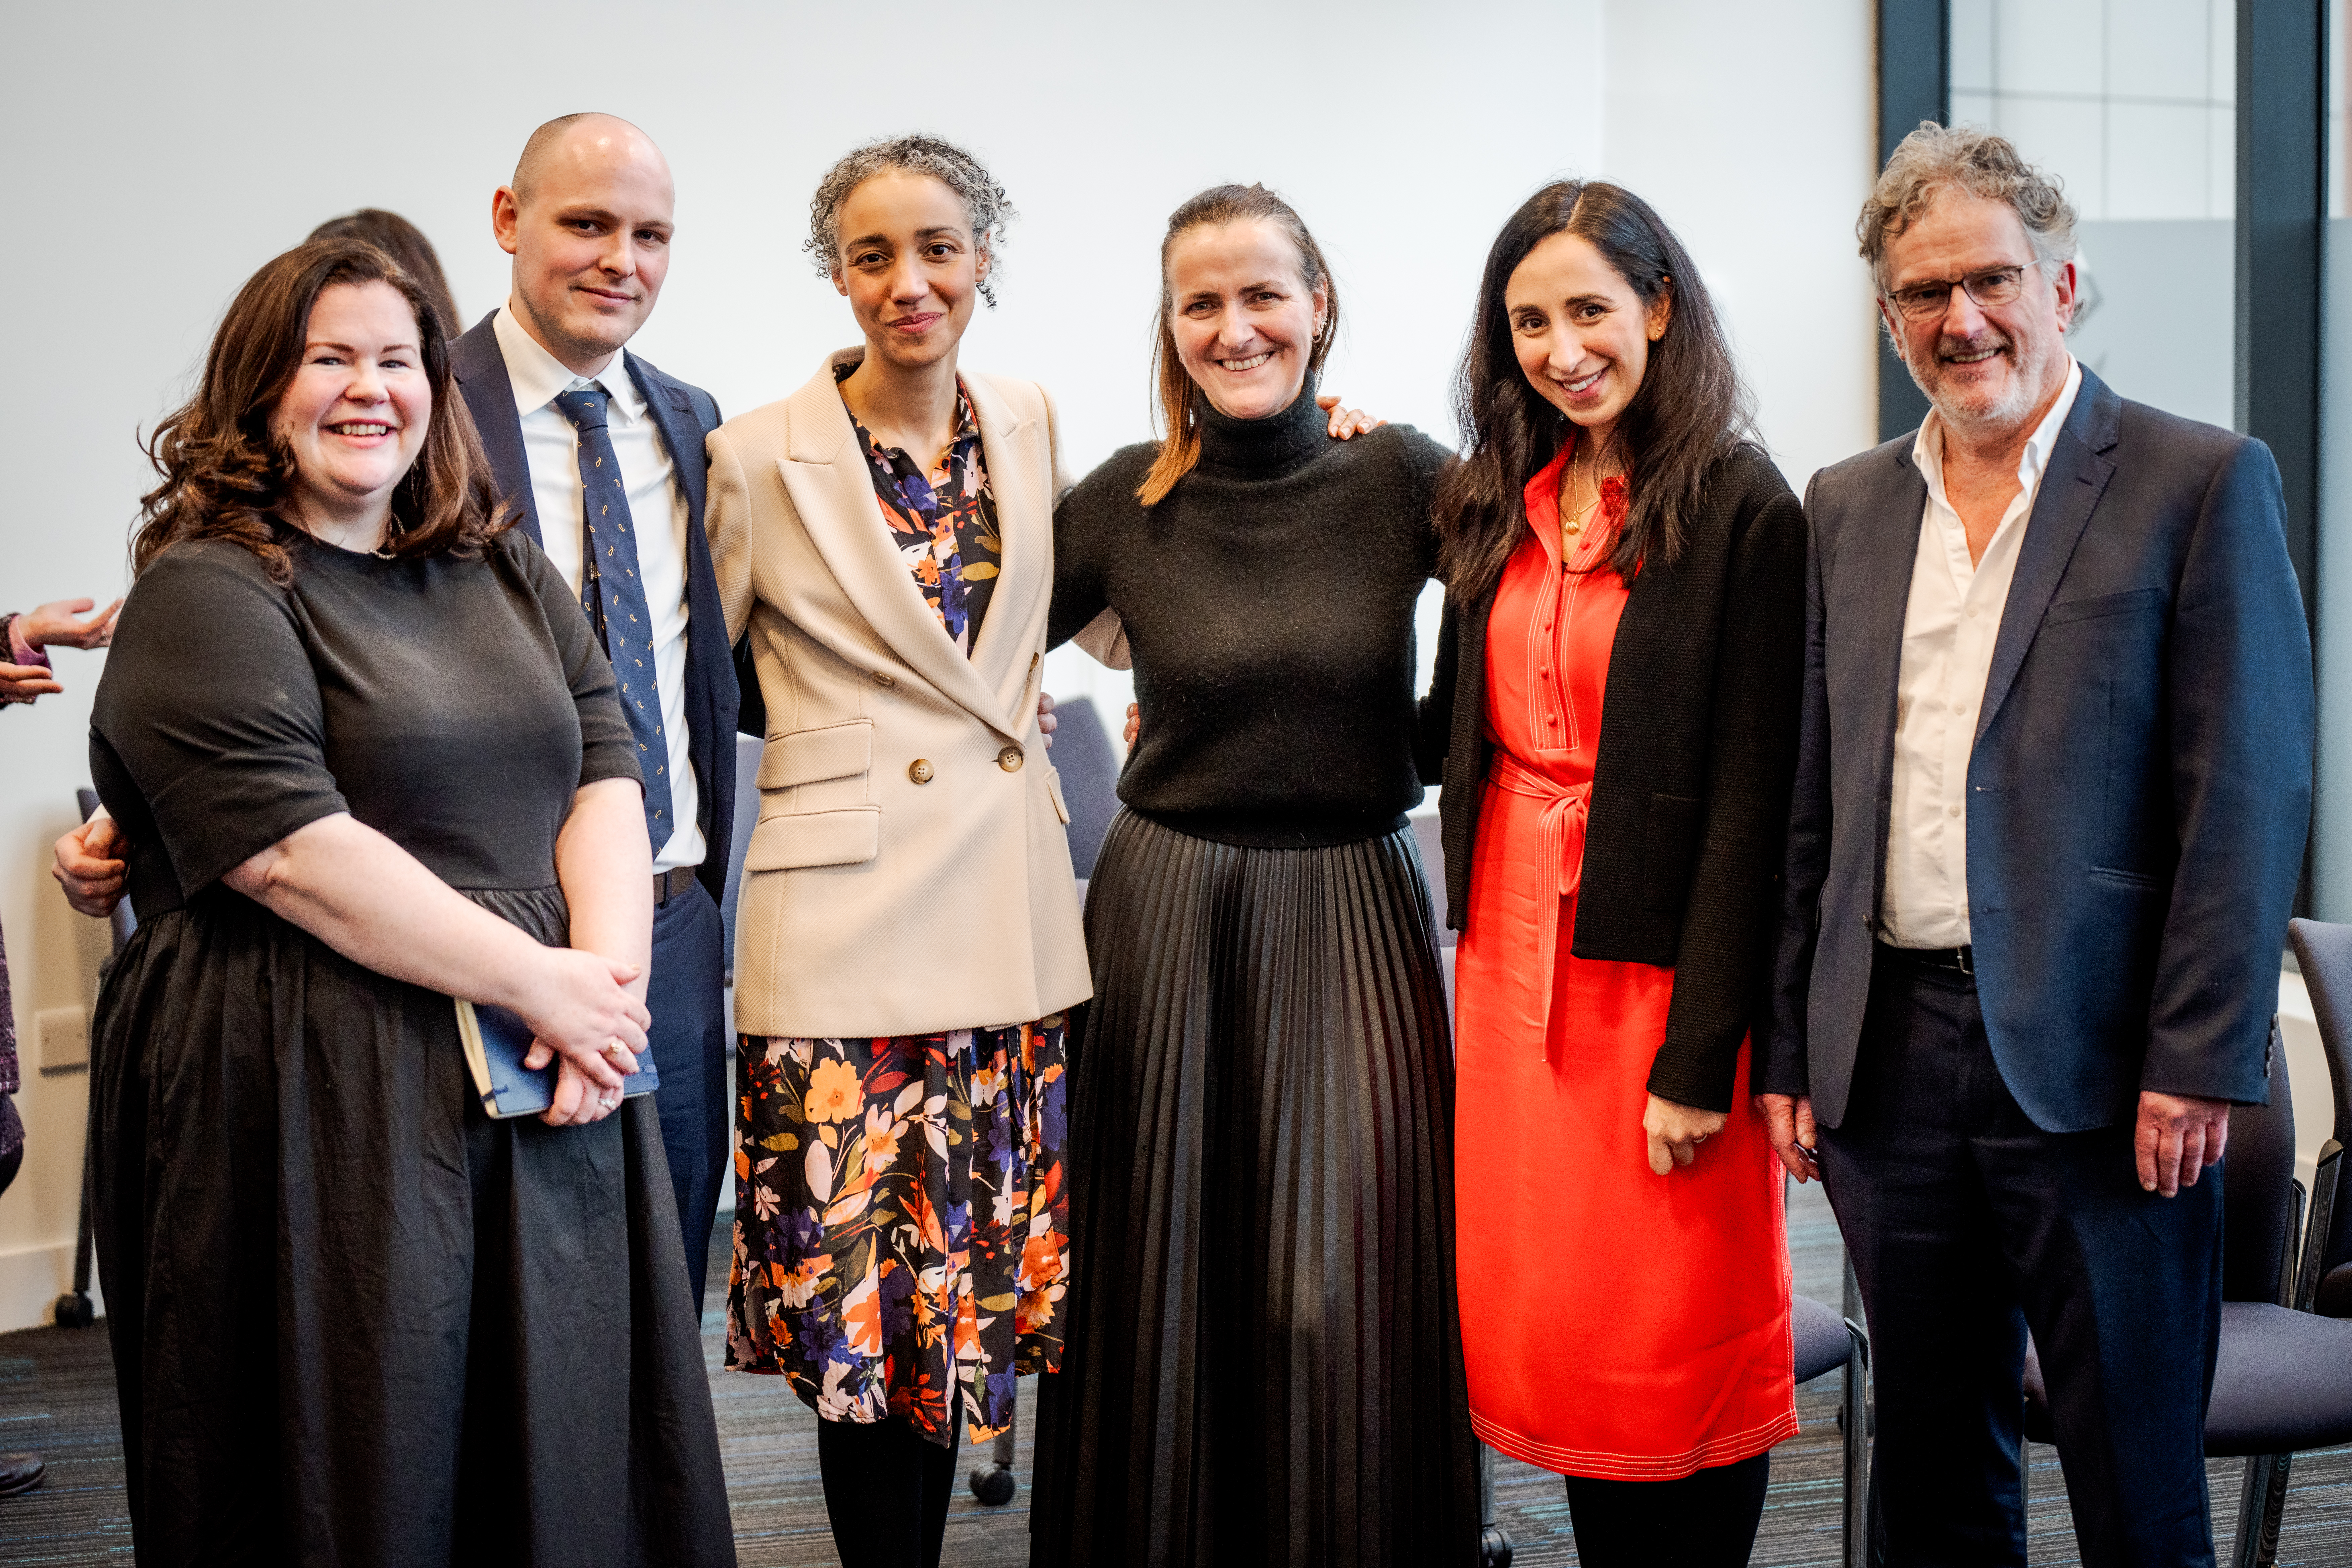 Strathclyde academics at the human rights event. L-R: Professor Katie Boyle; Douglas Jack; Dr Elaine Webster; Therese O'Donnell; Visiting Professor Kavita Chetty; Professor Alan Miller. Photo by Well Good Media